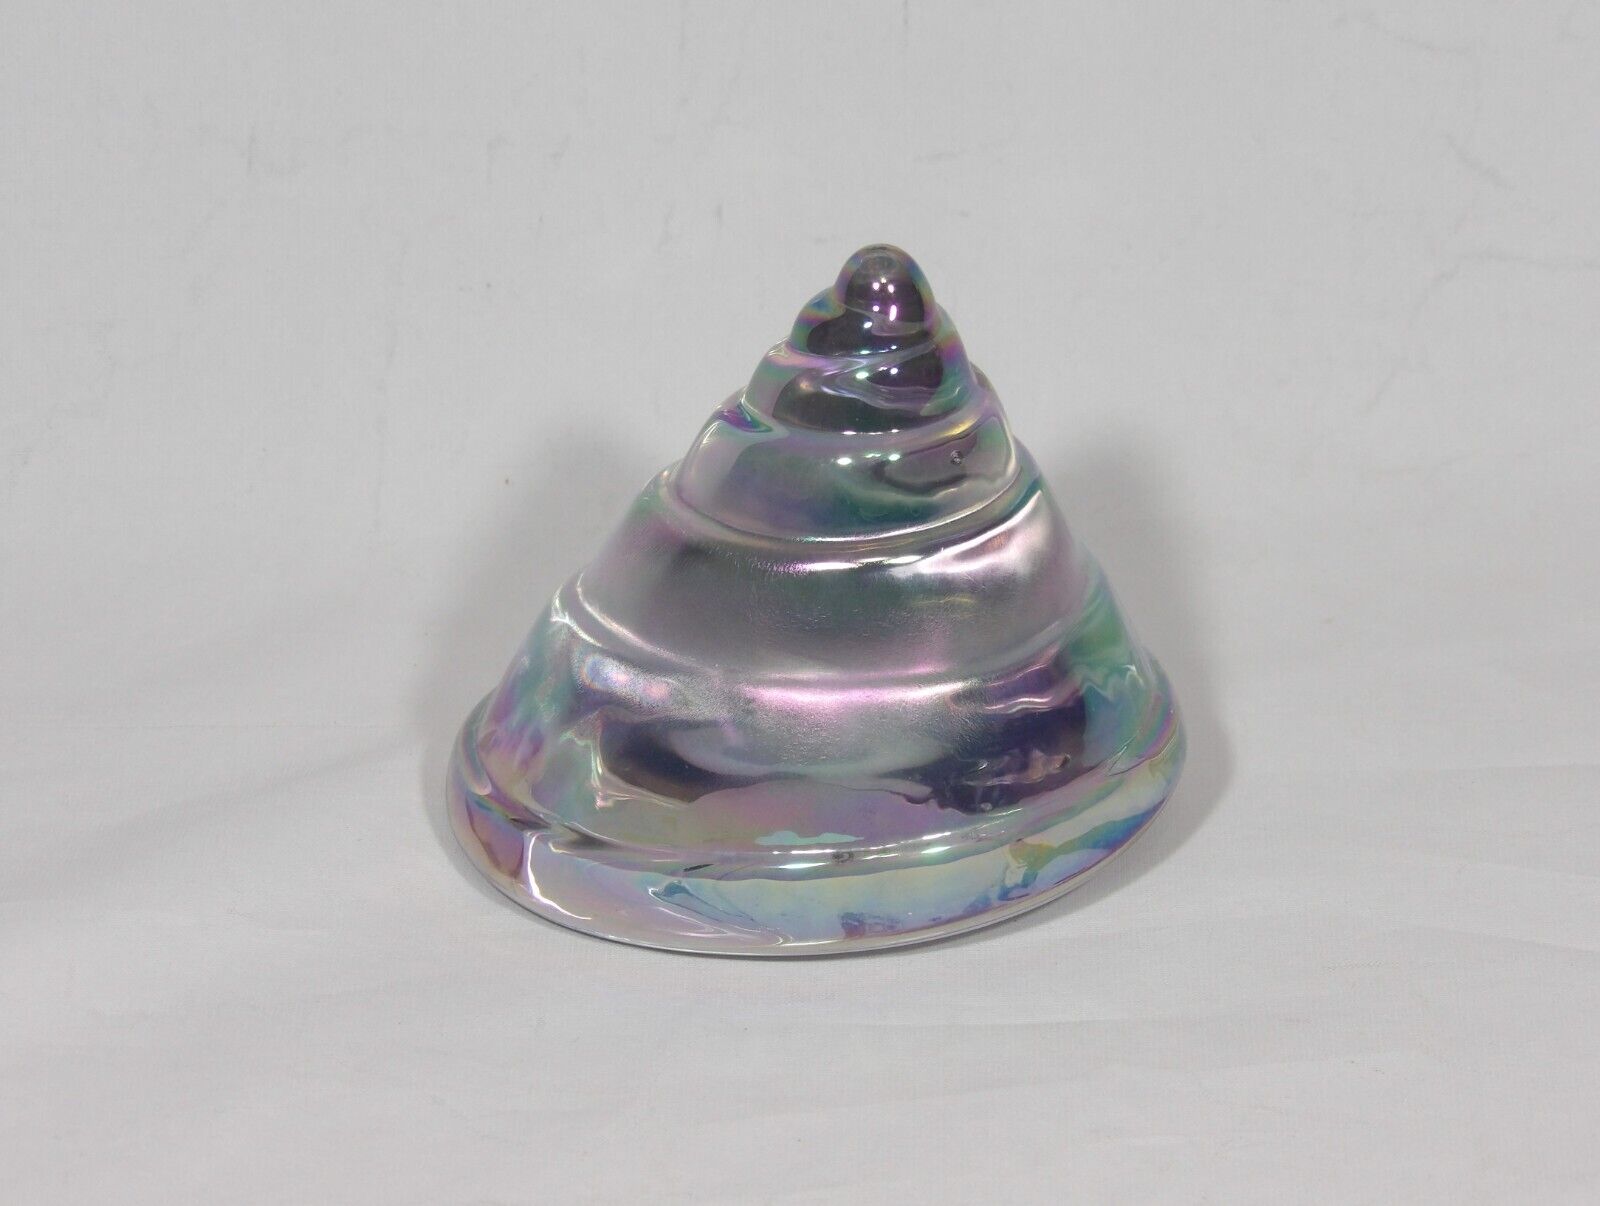 VINTAGE IRIDESCENT SNAIL SHELL PAPERWEIGHT LARGE ART GLASS UNICORN OFFICE WOW